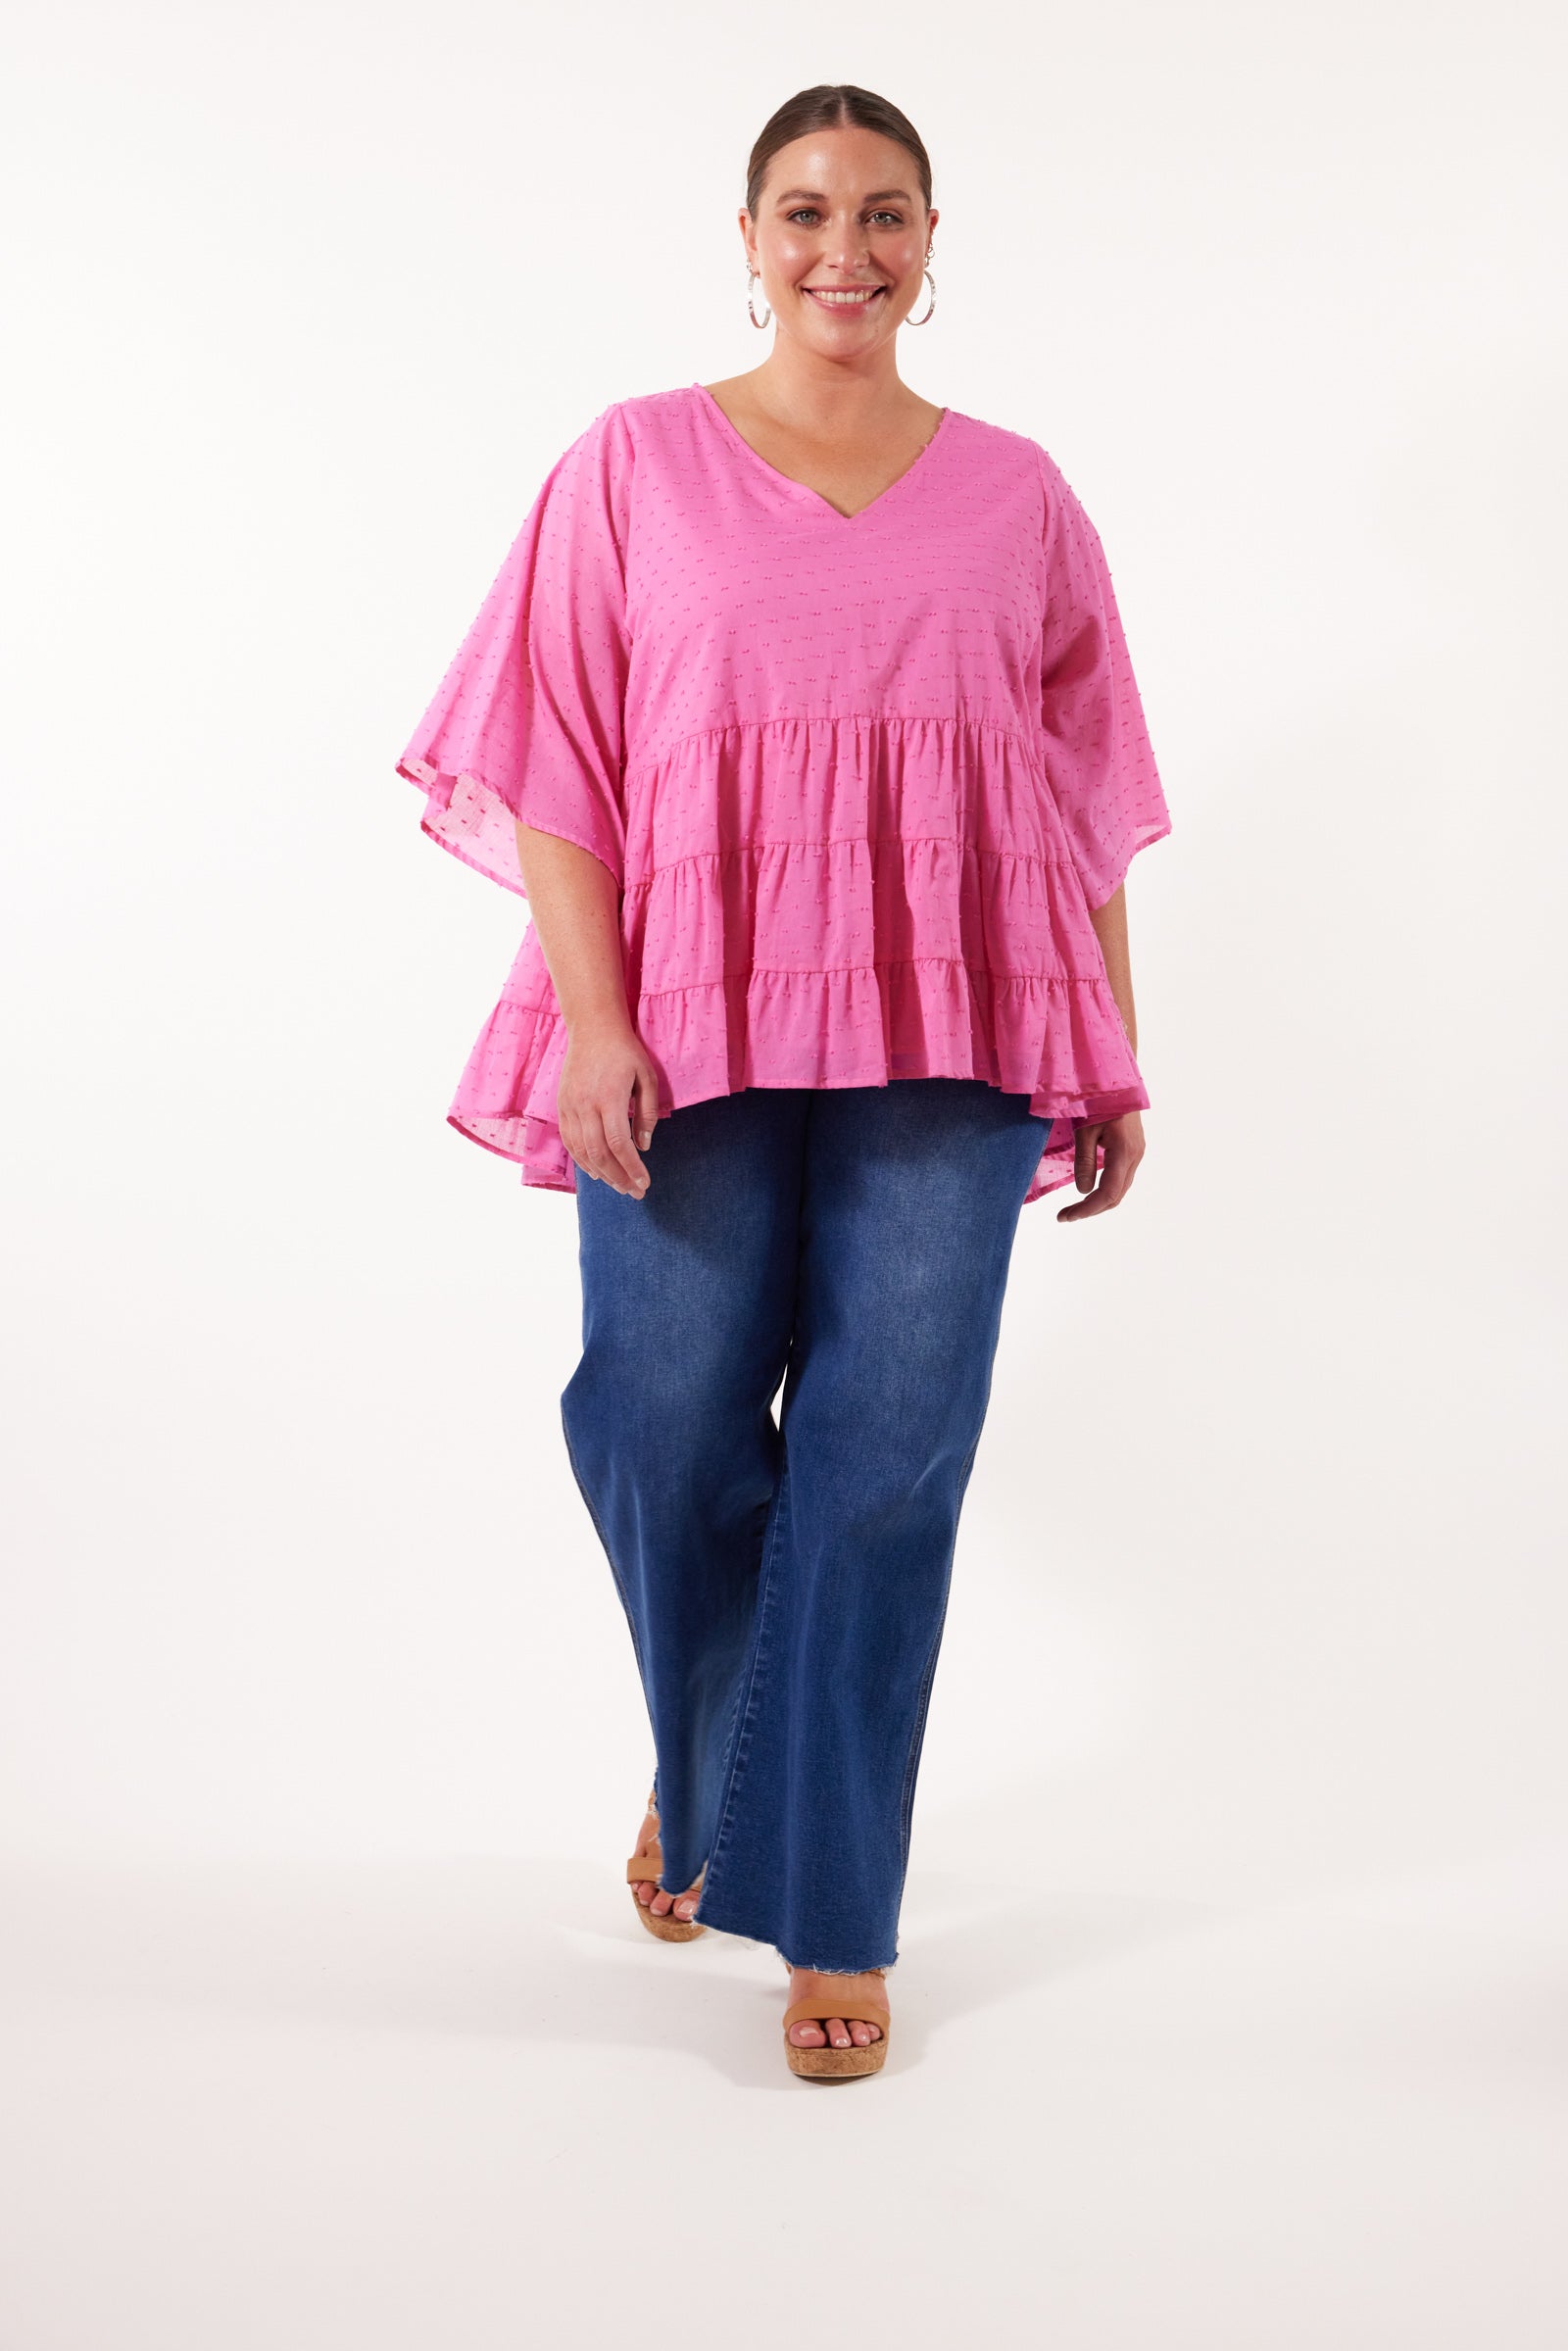 Soiree Relax Top - Camelia - Isle of Mine Clothing - Top 3/4 Sleeve One Size